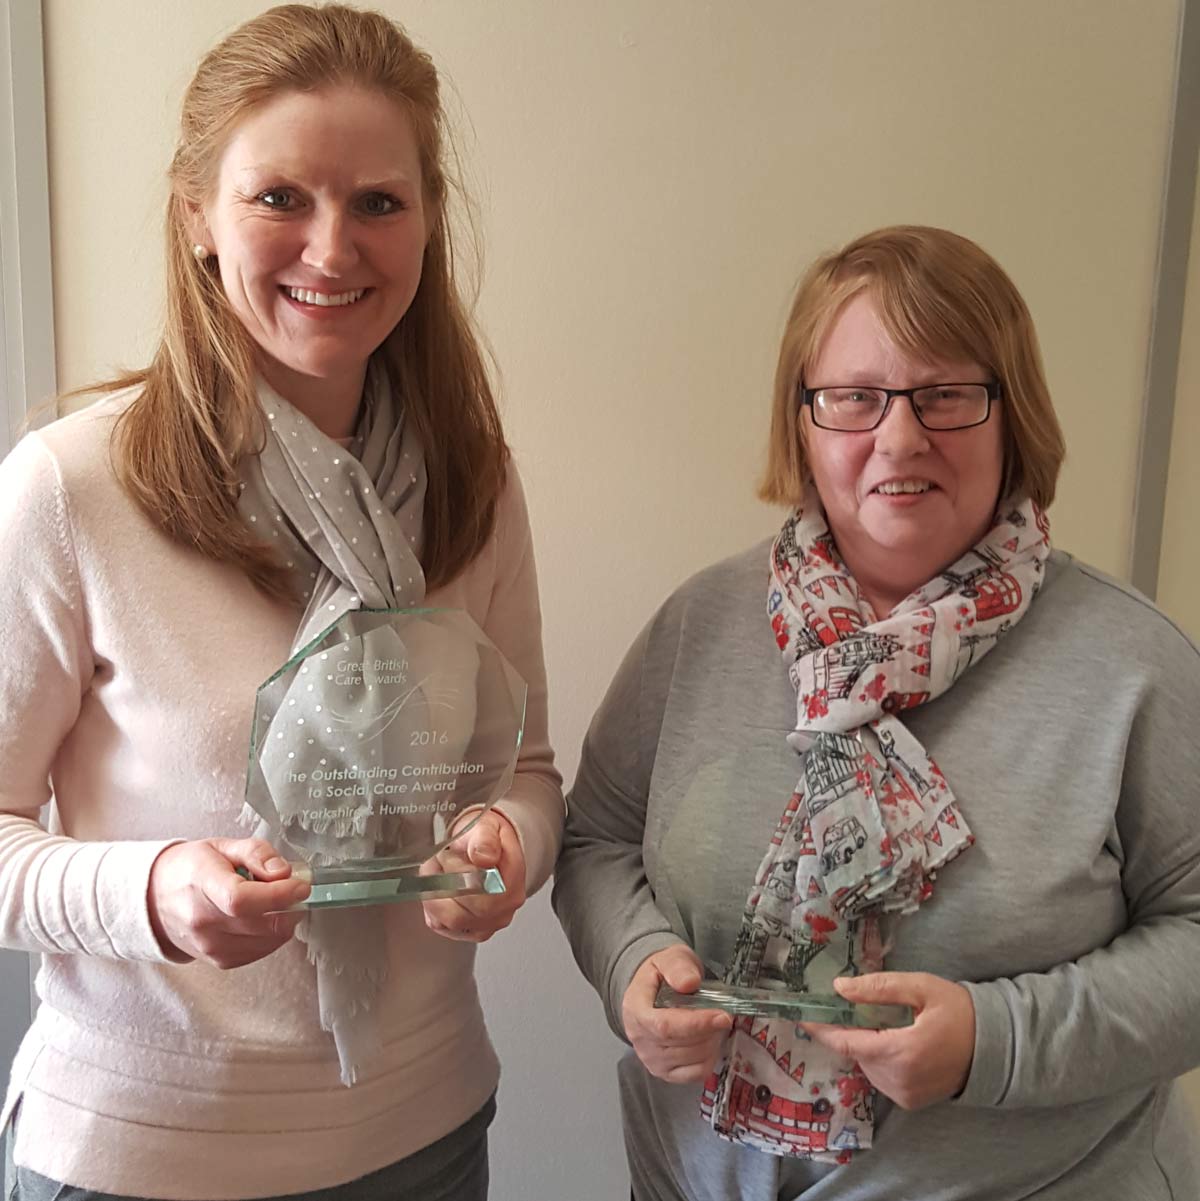 Samantha Harrison and Samantha Fenwick-Scott, from Continued Care, won the Outstanding Contribution to Social Care and the Care Co-ordinator awards respectively, at the Great British Care Awards in Yorkshire and the Humber